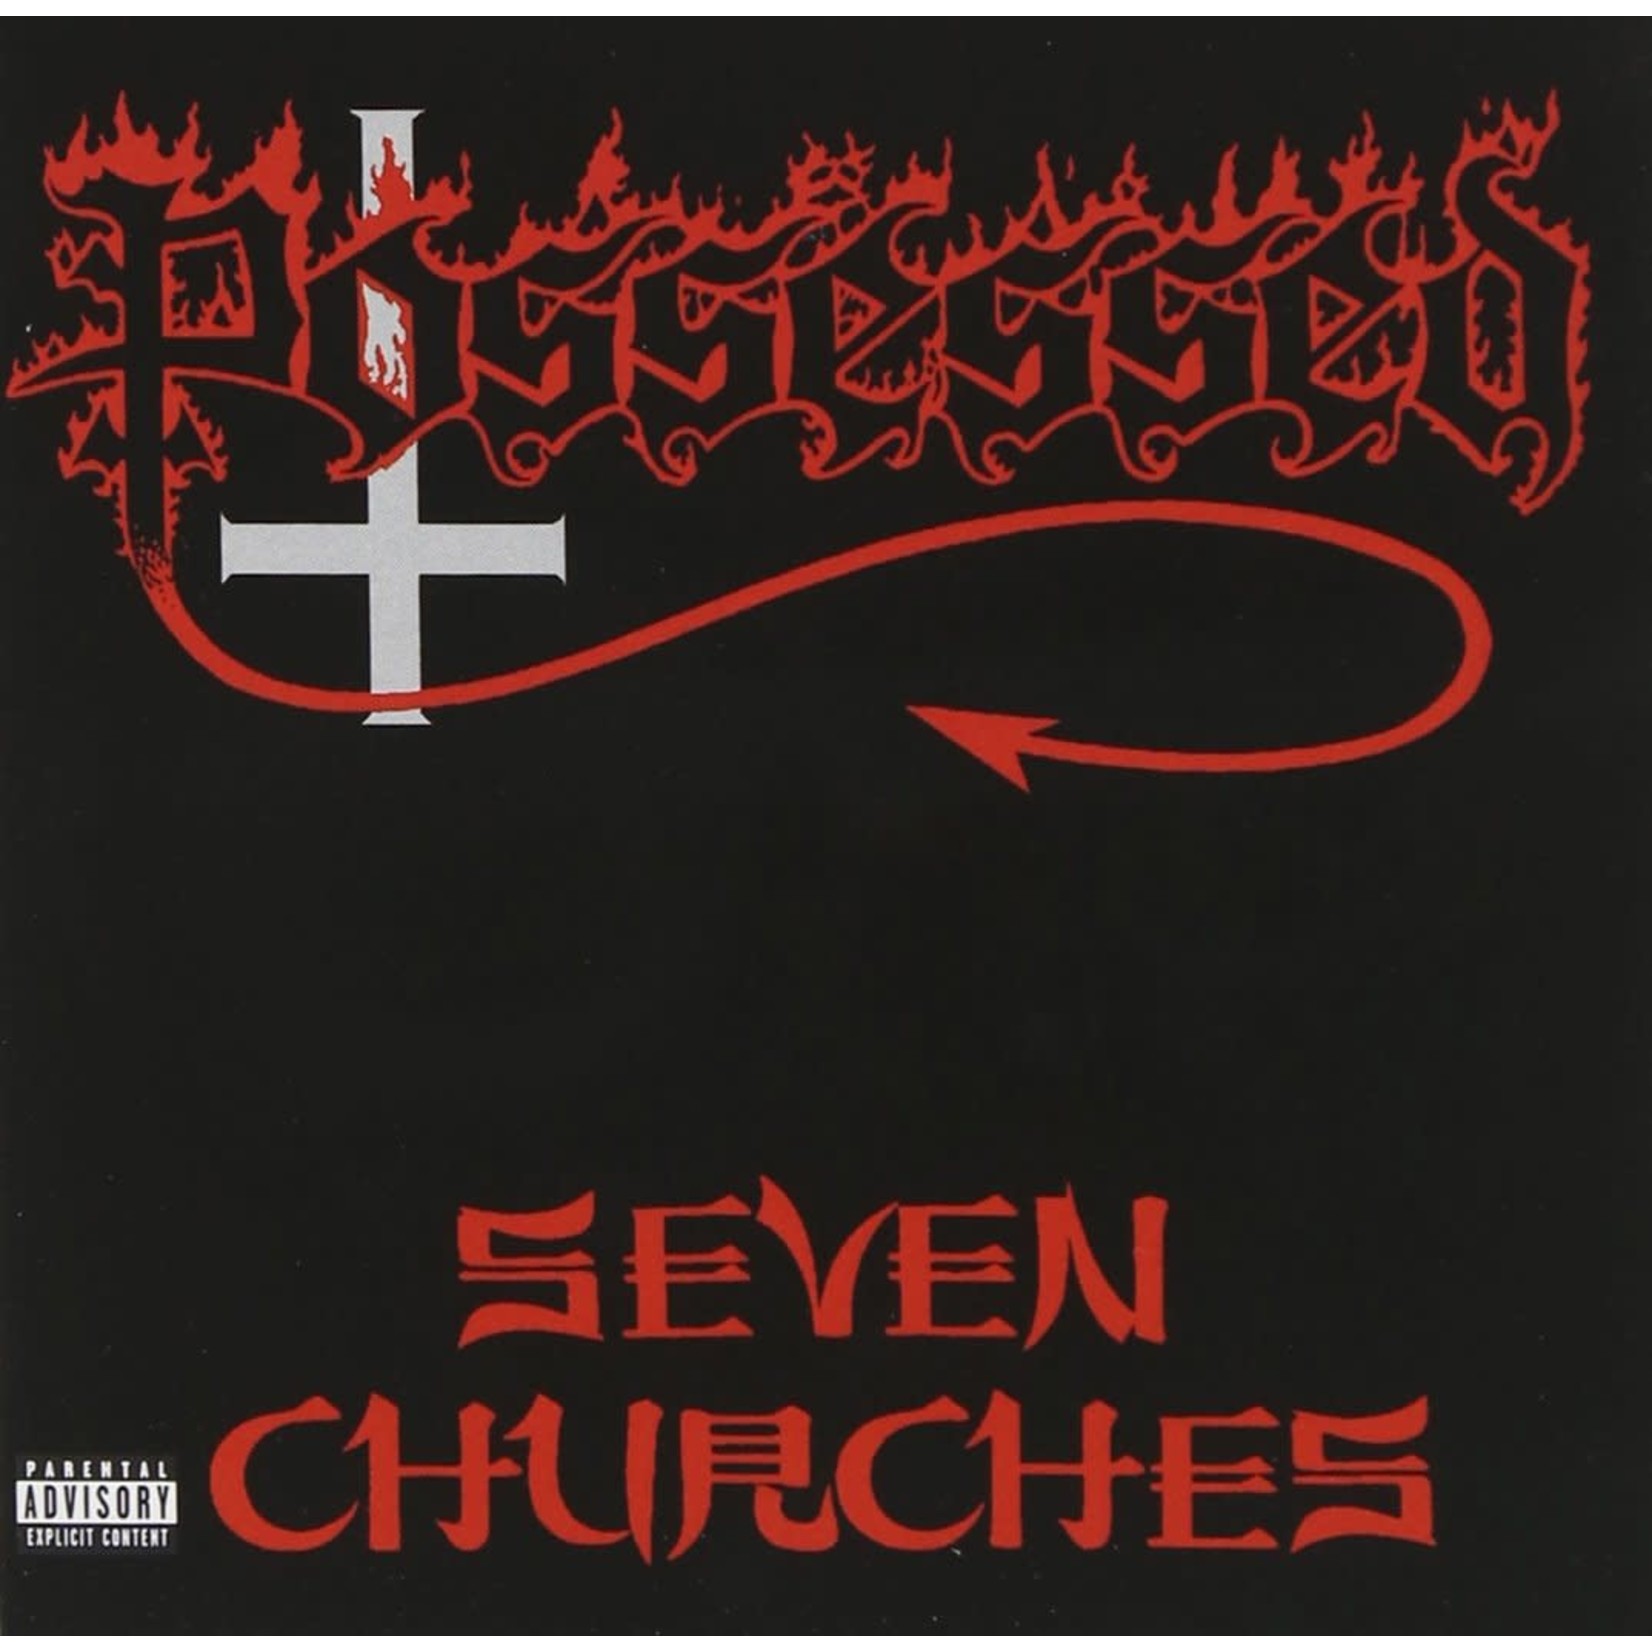 [New] Possessed: Seven Churches (limited forest green vinyl) [CENTURY MEDIA]